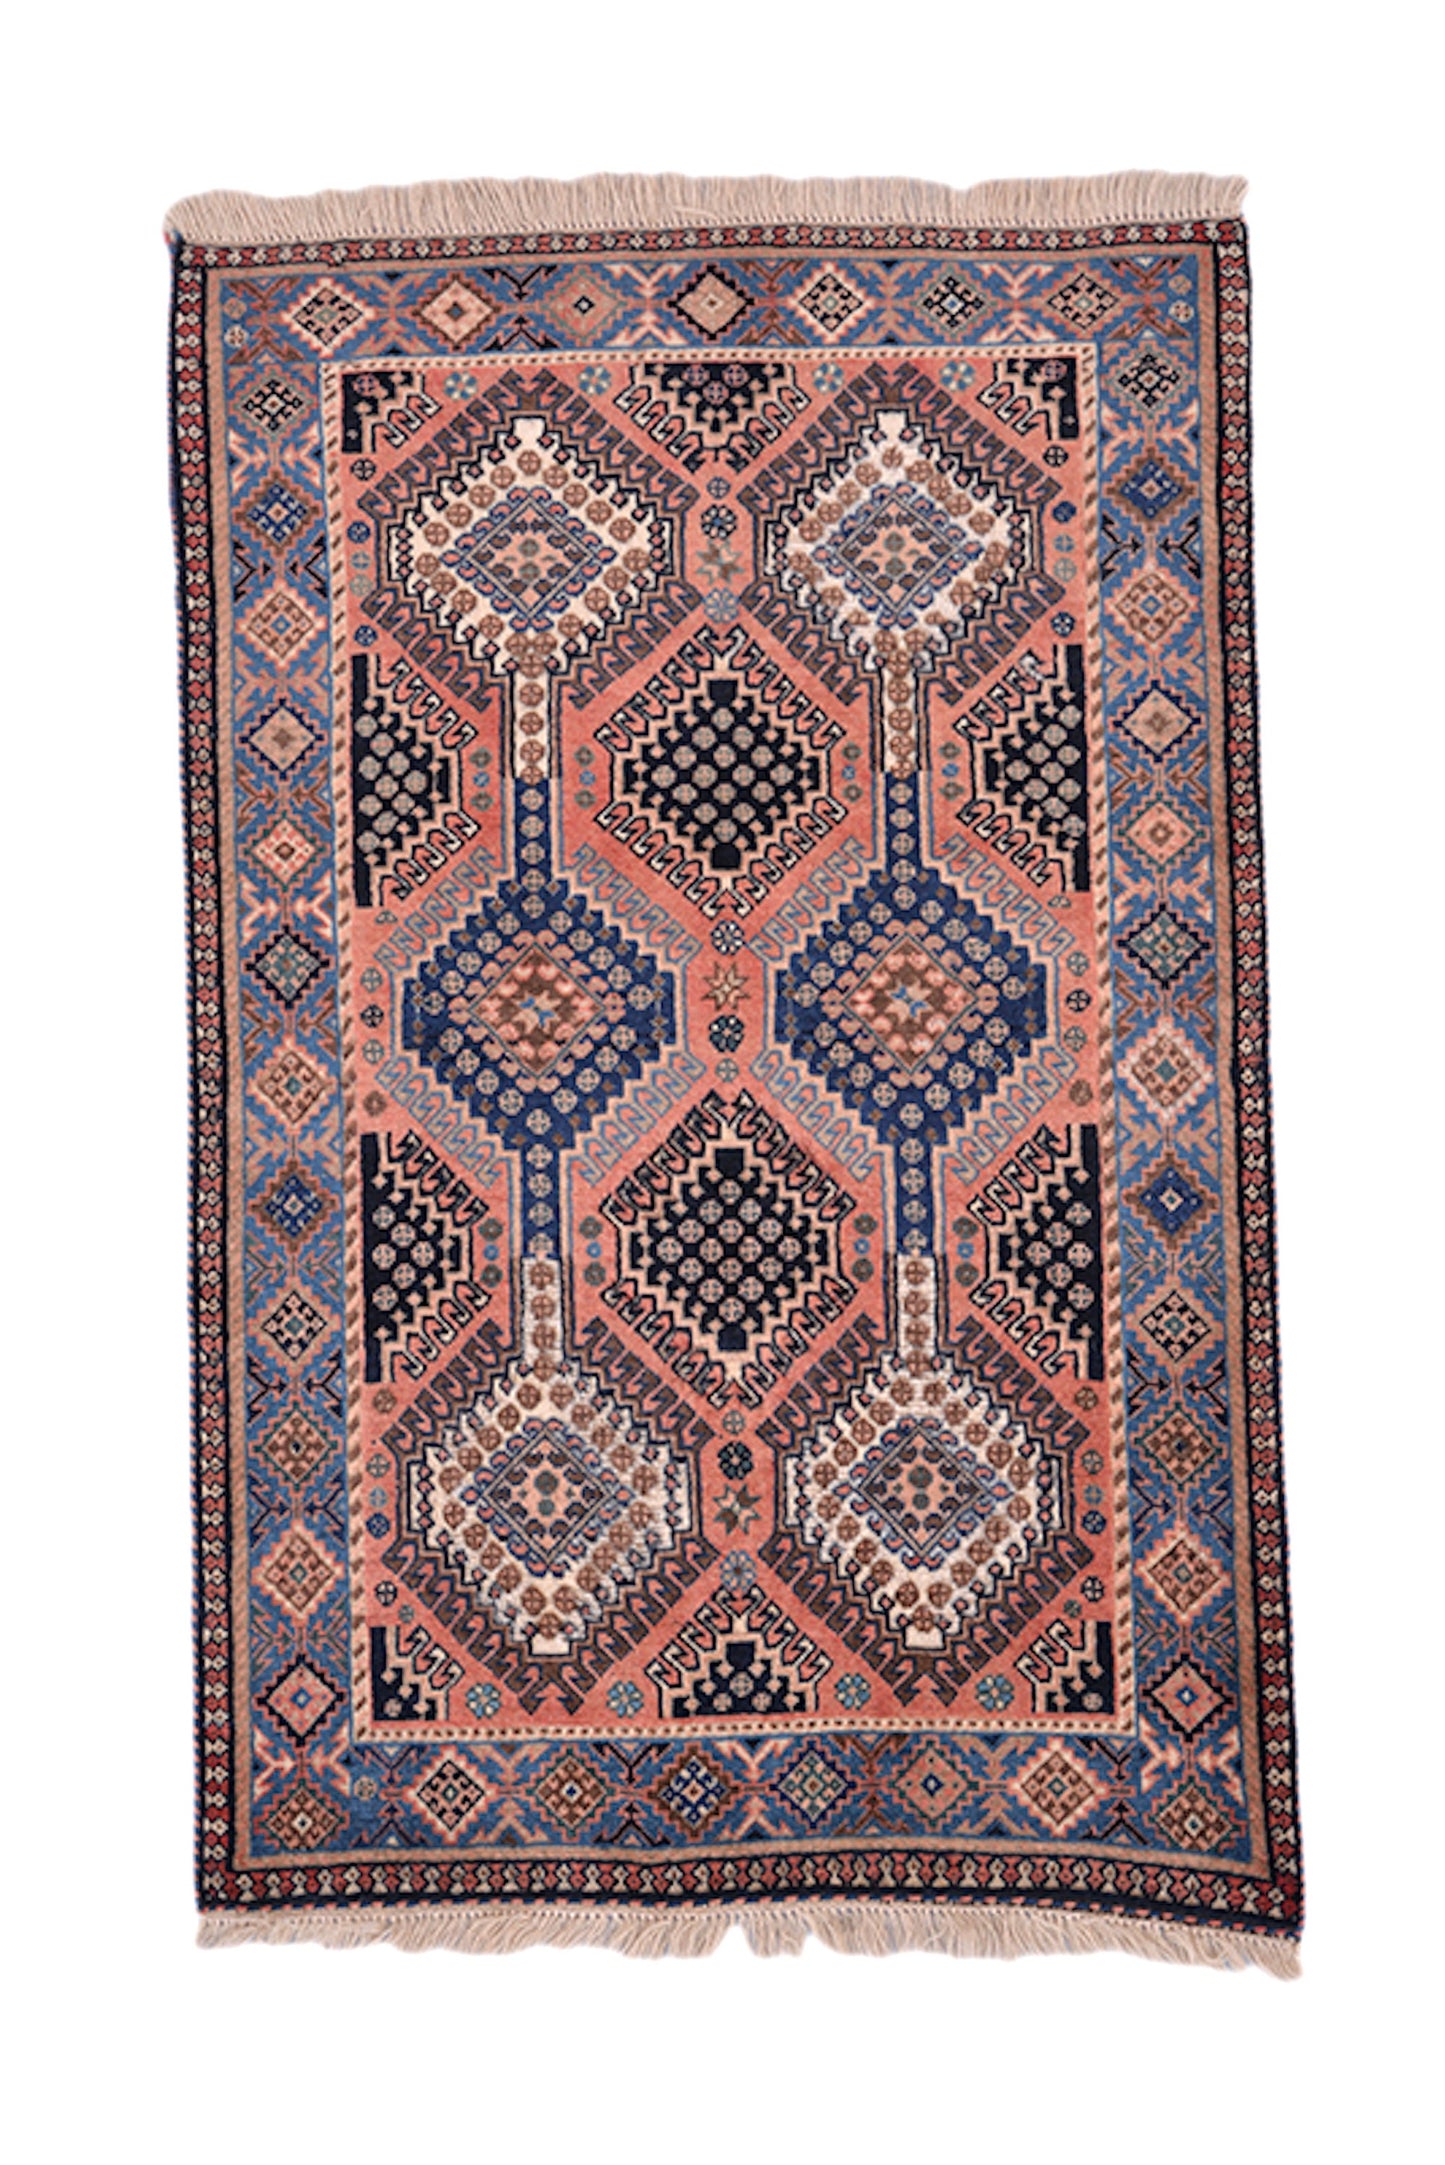 Pink Blue Hand Knotted 3x4 Rug | Geometric Tribal Medallion Rug | Border made of Small Medallions | Wool Antique Vintage Rug